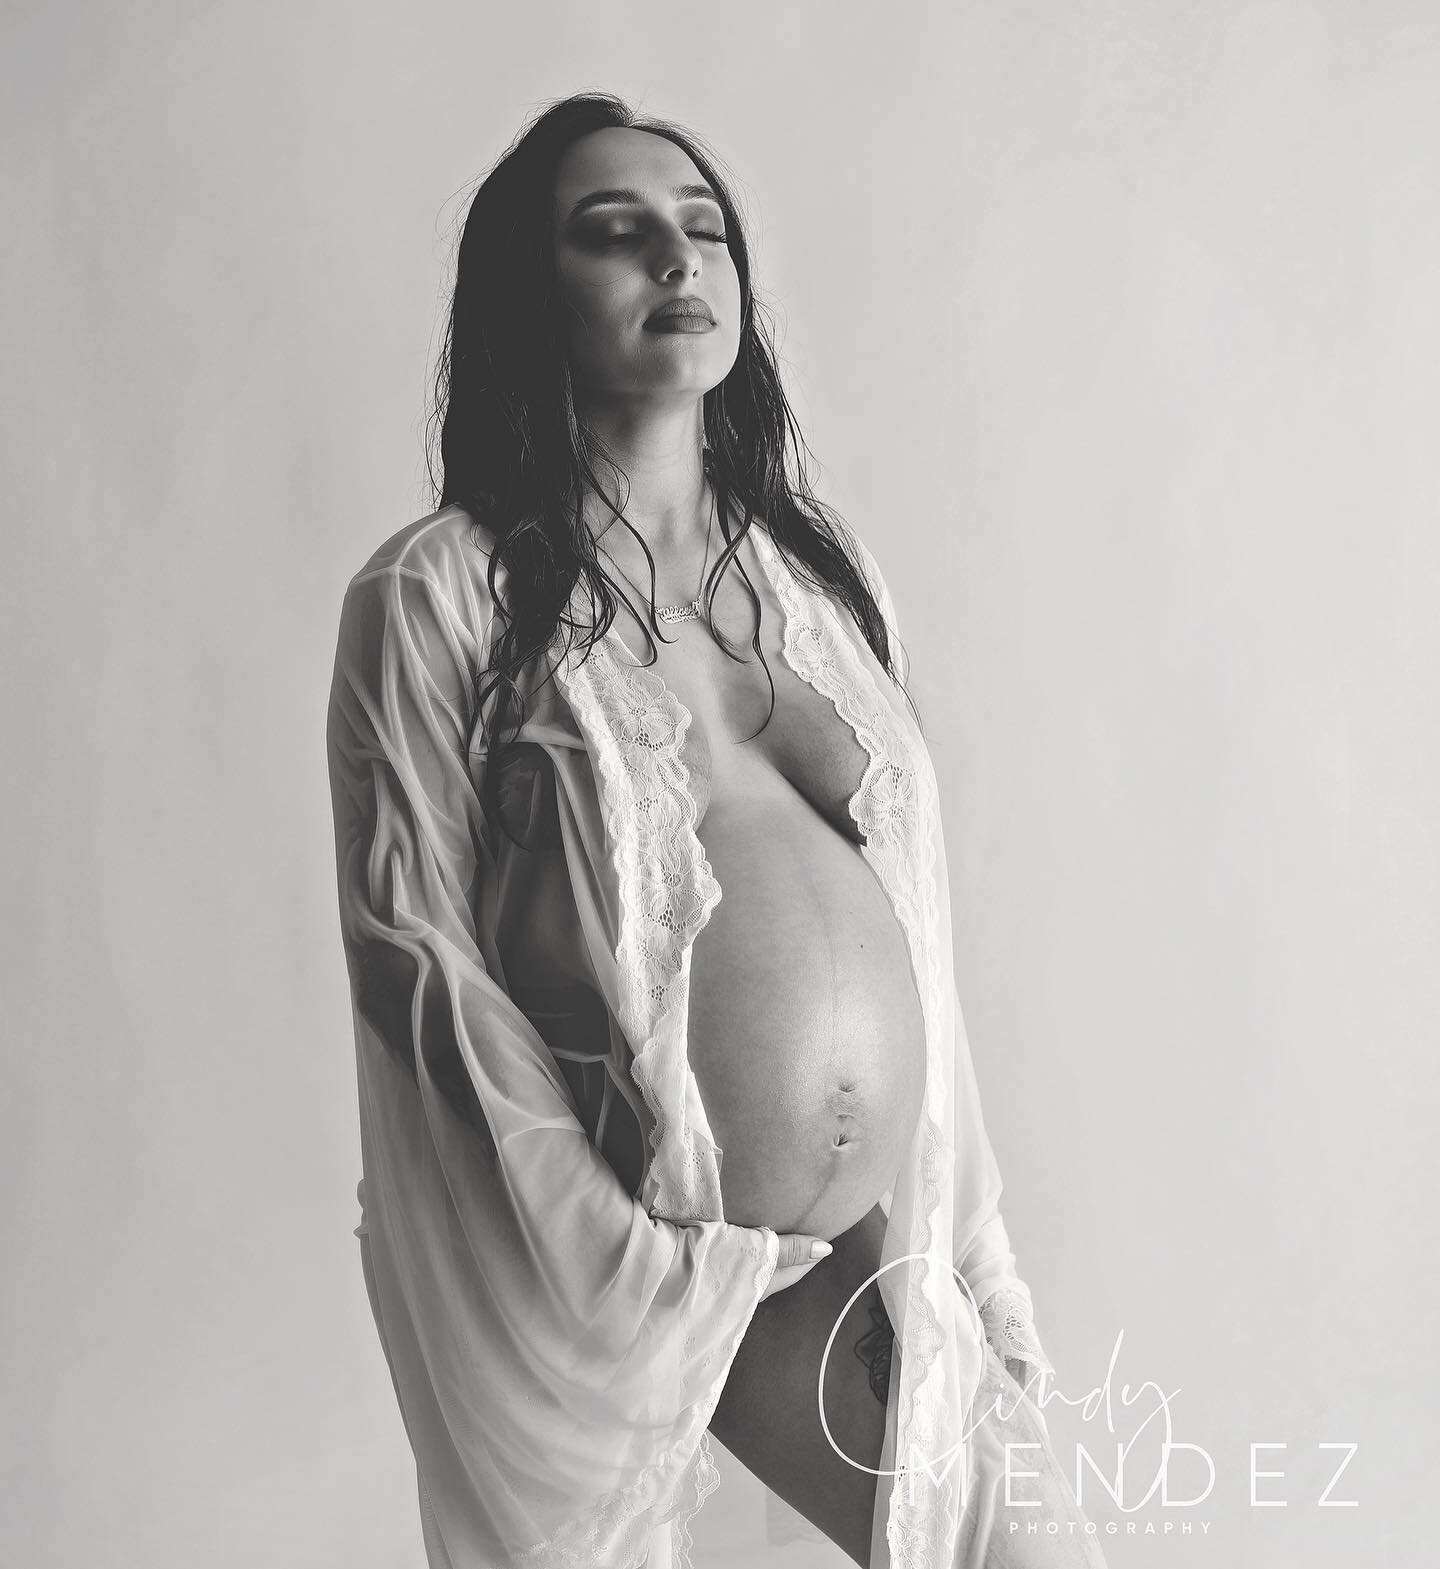 Gahhh obsessed is an understatement!!! When momma to be asked, she shall receive! Love how this turned out #maternityphotography #maternity #mommytobe #beautiful #blackandwhite #pregnancy #love #gorgeous #maternityphotographer #rhodeisland #cindymend